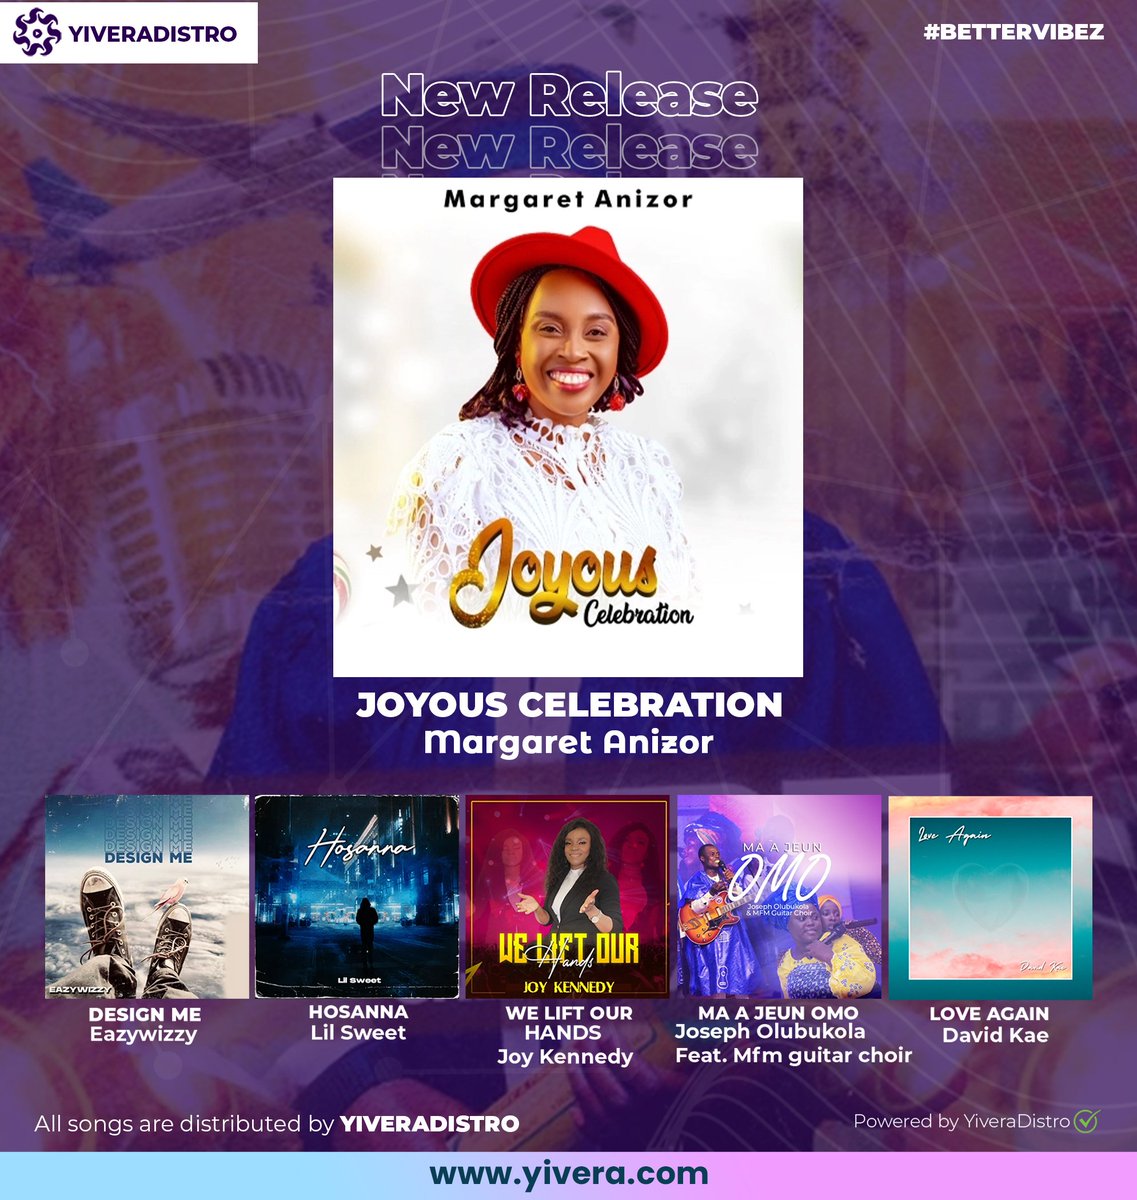 #nowout
Available on all digital stores.

⭐ JOYOUS CELEBRATION 
⭐ DESIGN ME
⭐ HOSANNA 
⭐ WE LIFT OUR HANDS 
⭐ YES INDEED 
⭐ MA A JEUN OMO 
⭐ LOVE AGAIN 
Powered by @yiveradistro

 #distro
#ViralVideos  Spotify #PINKFRIDAY2
 #الأهلي_الاتحاد  #AudioLeak